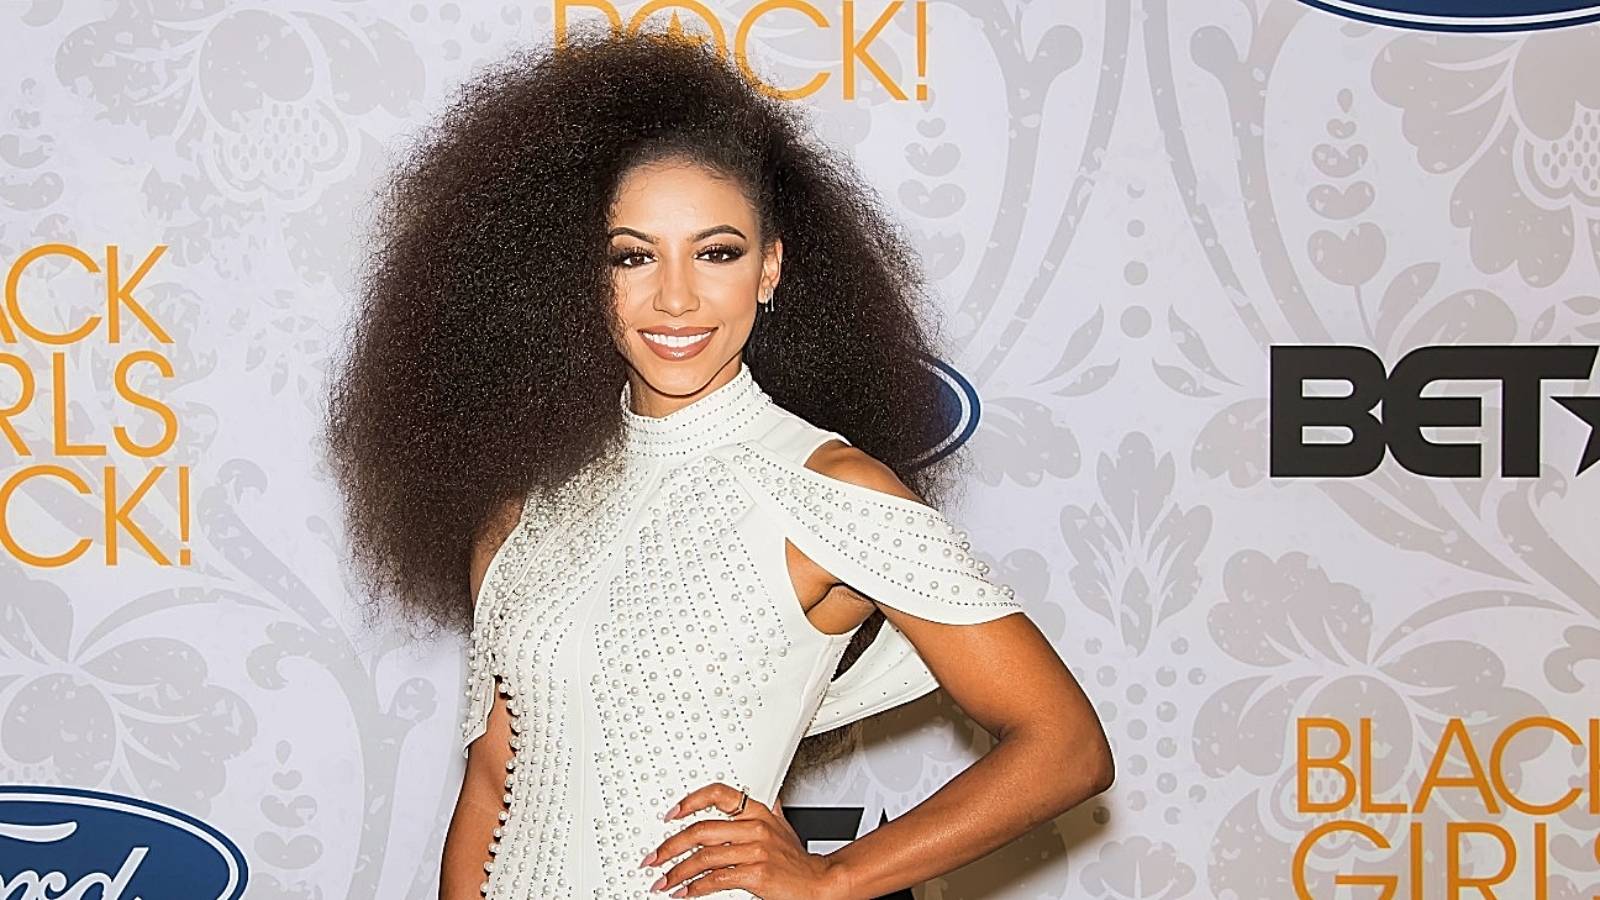 Cheslie Kryst attends 2019 Black Girls Rock! at NJ Performing Arts Center on August 25, 2019 in Newark, New Jersey.  